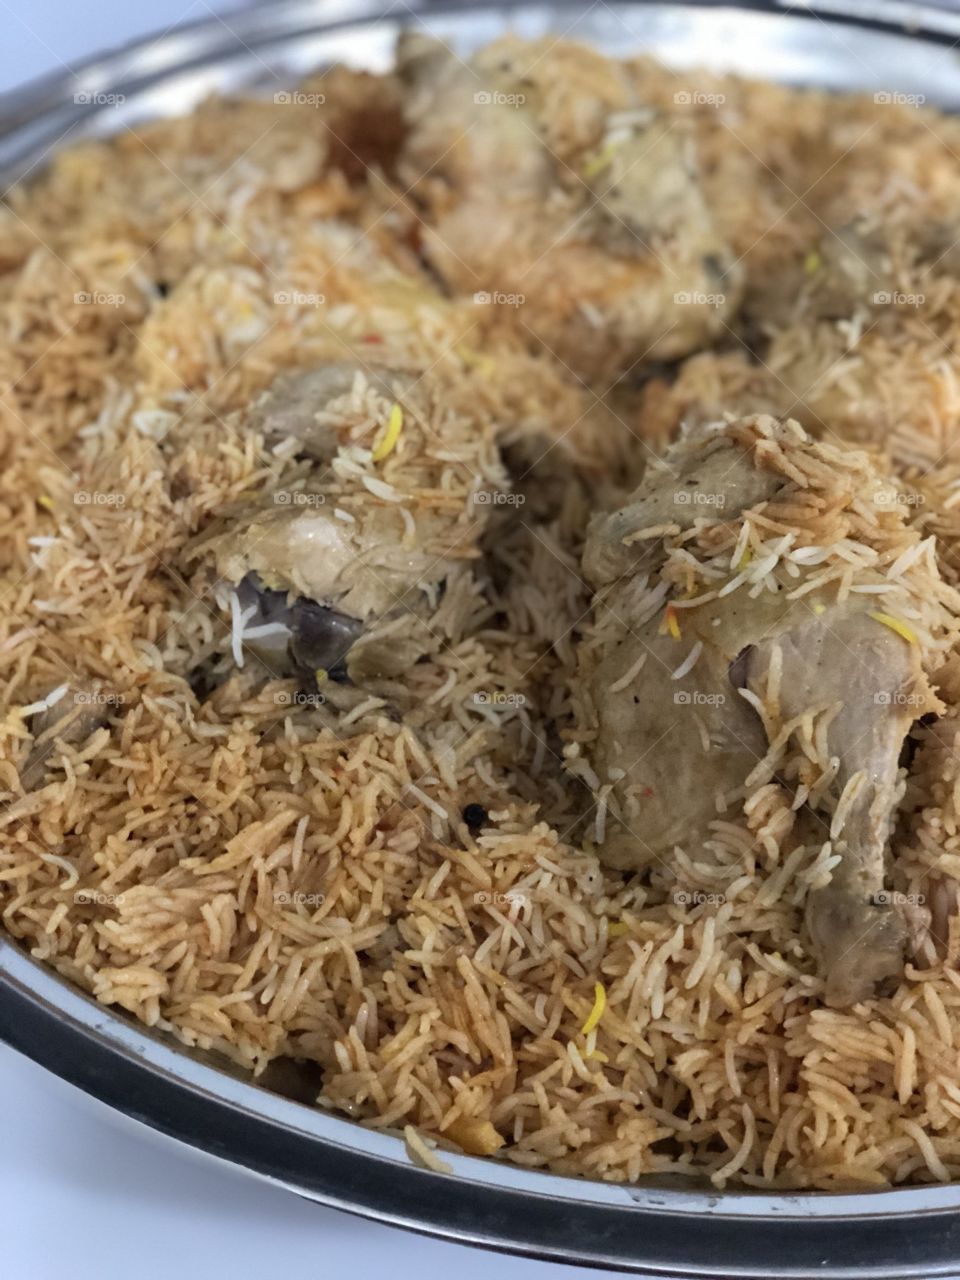 Item name : "Ruz Kabli Dujaj", or Kabli rice with Chicken.this dish basically came from Bukhara Afghanistan but now days The main Afghani cooking concept has changed. Our Saudi chefs cook this dish in a whole new way with awesome twists :)